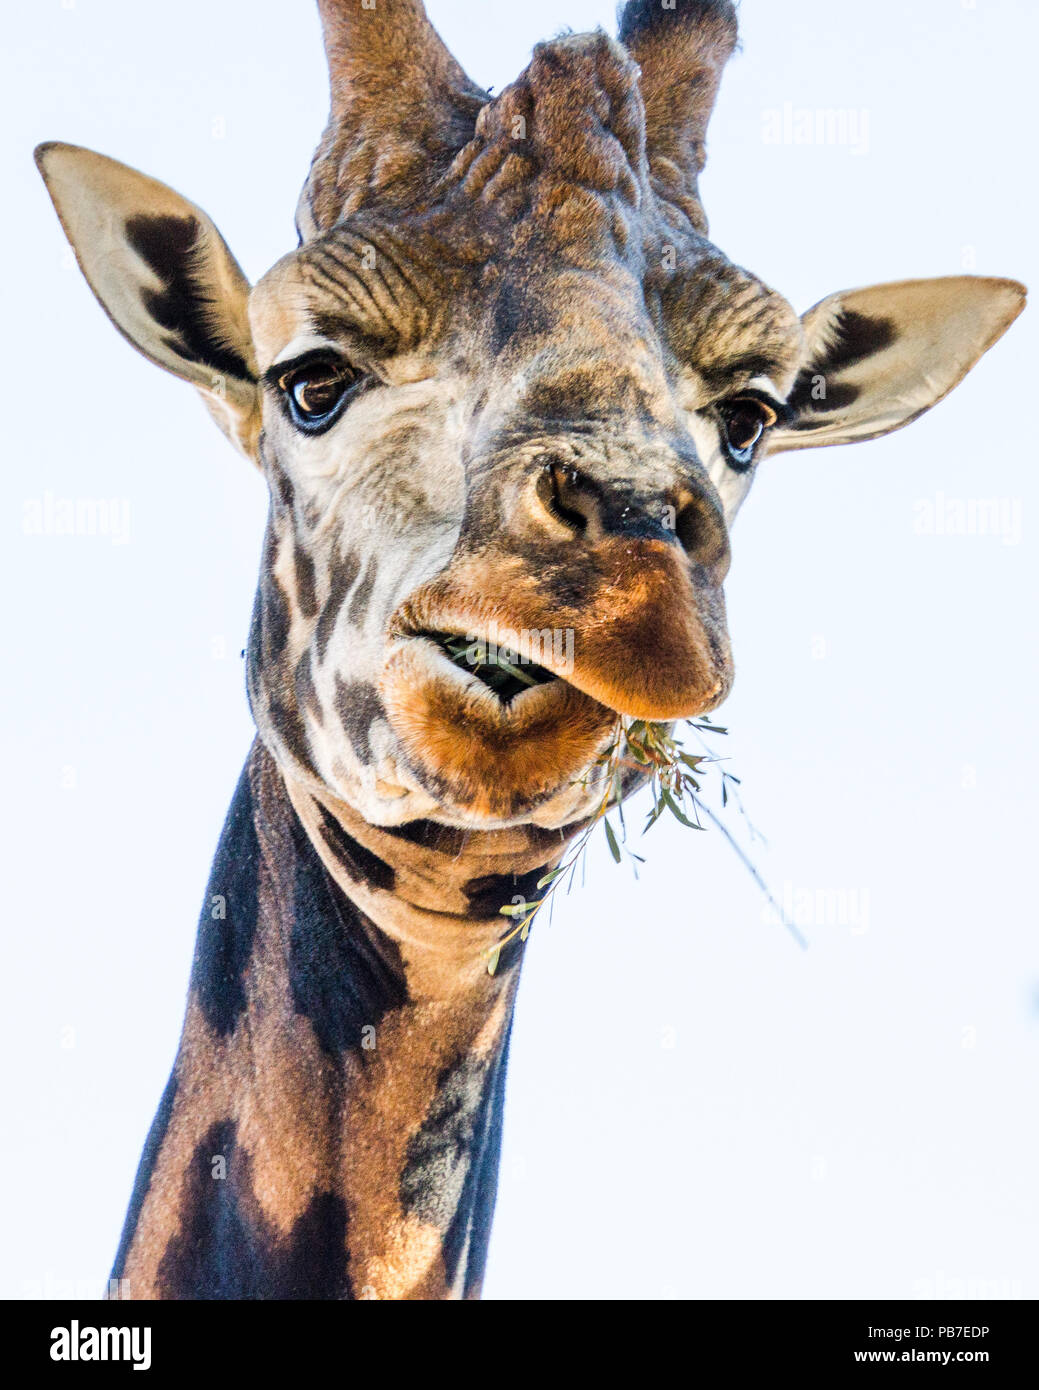 Animal portrait of African giraffe chewing leaves, close up. Stock Photo